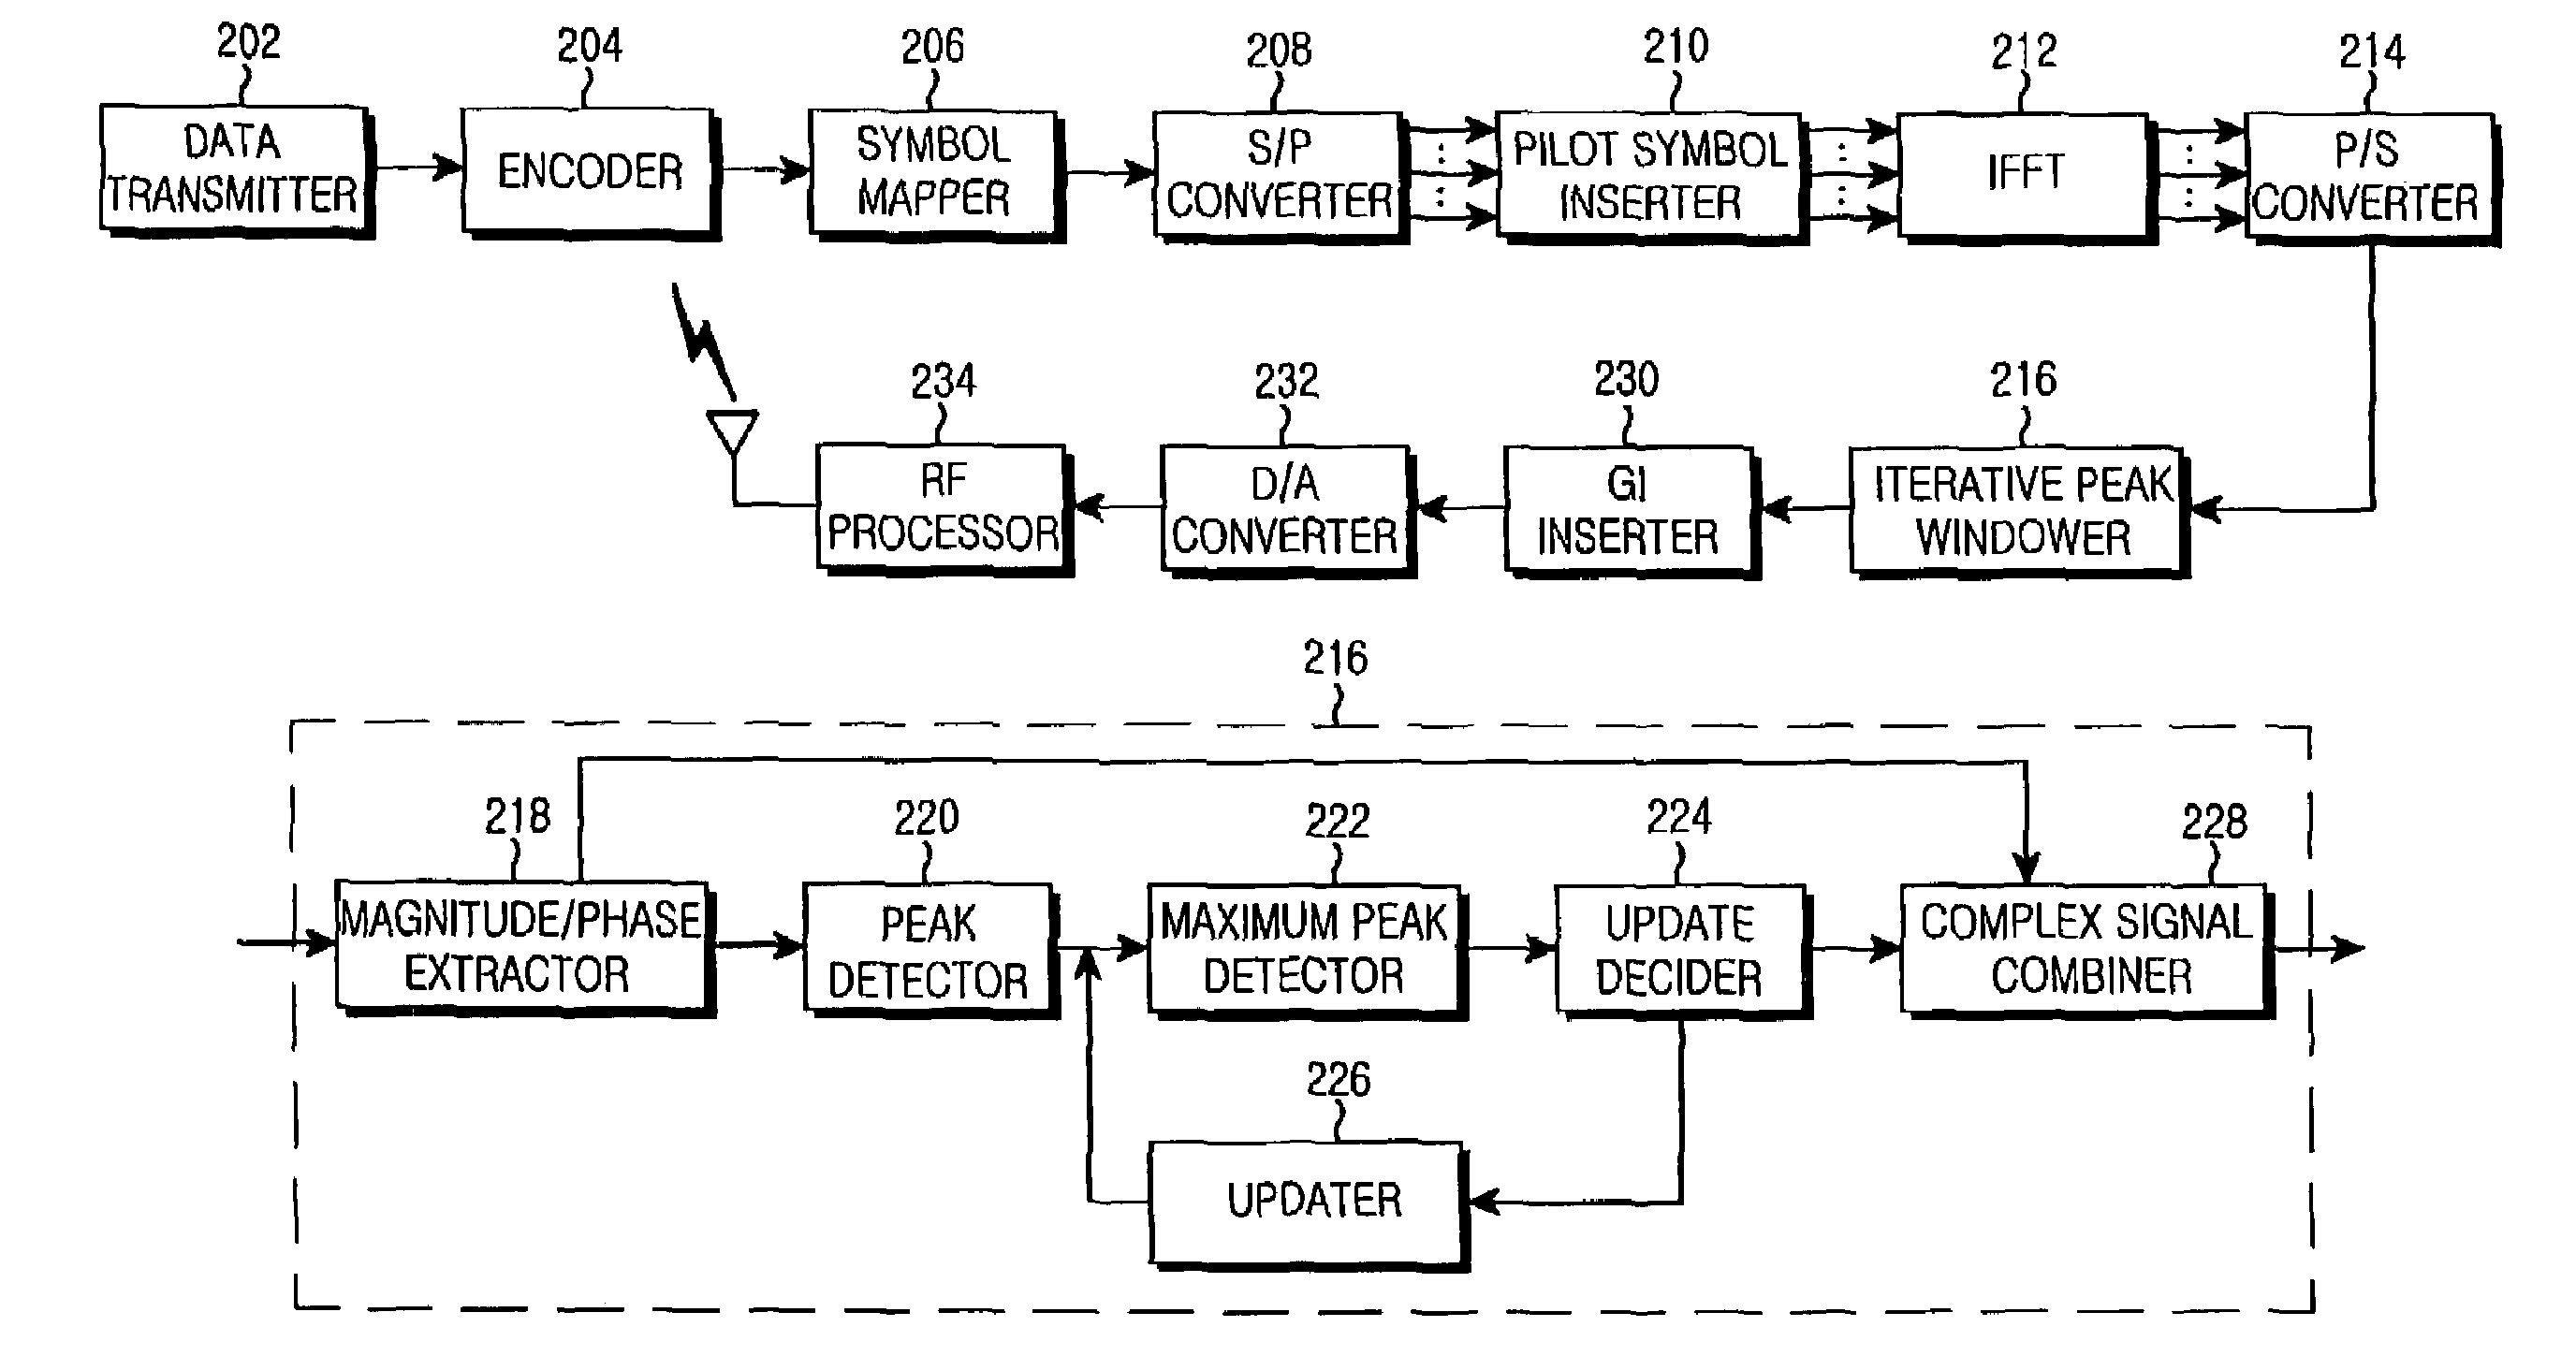 Apparatus and method for reducing peak-to-average power ratio in an OFDM communication system